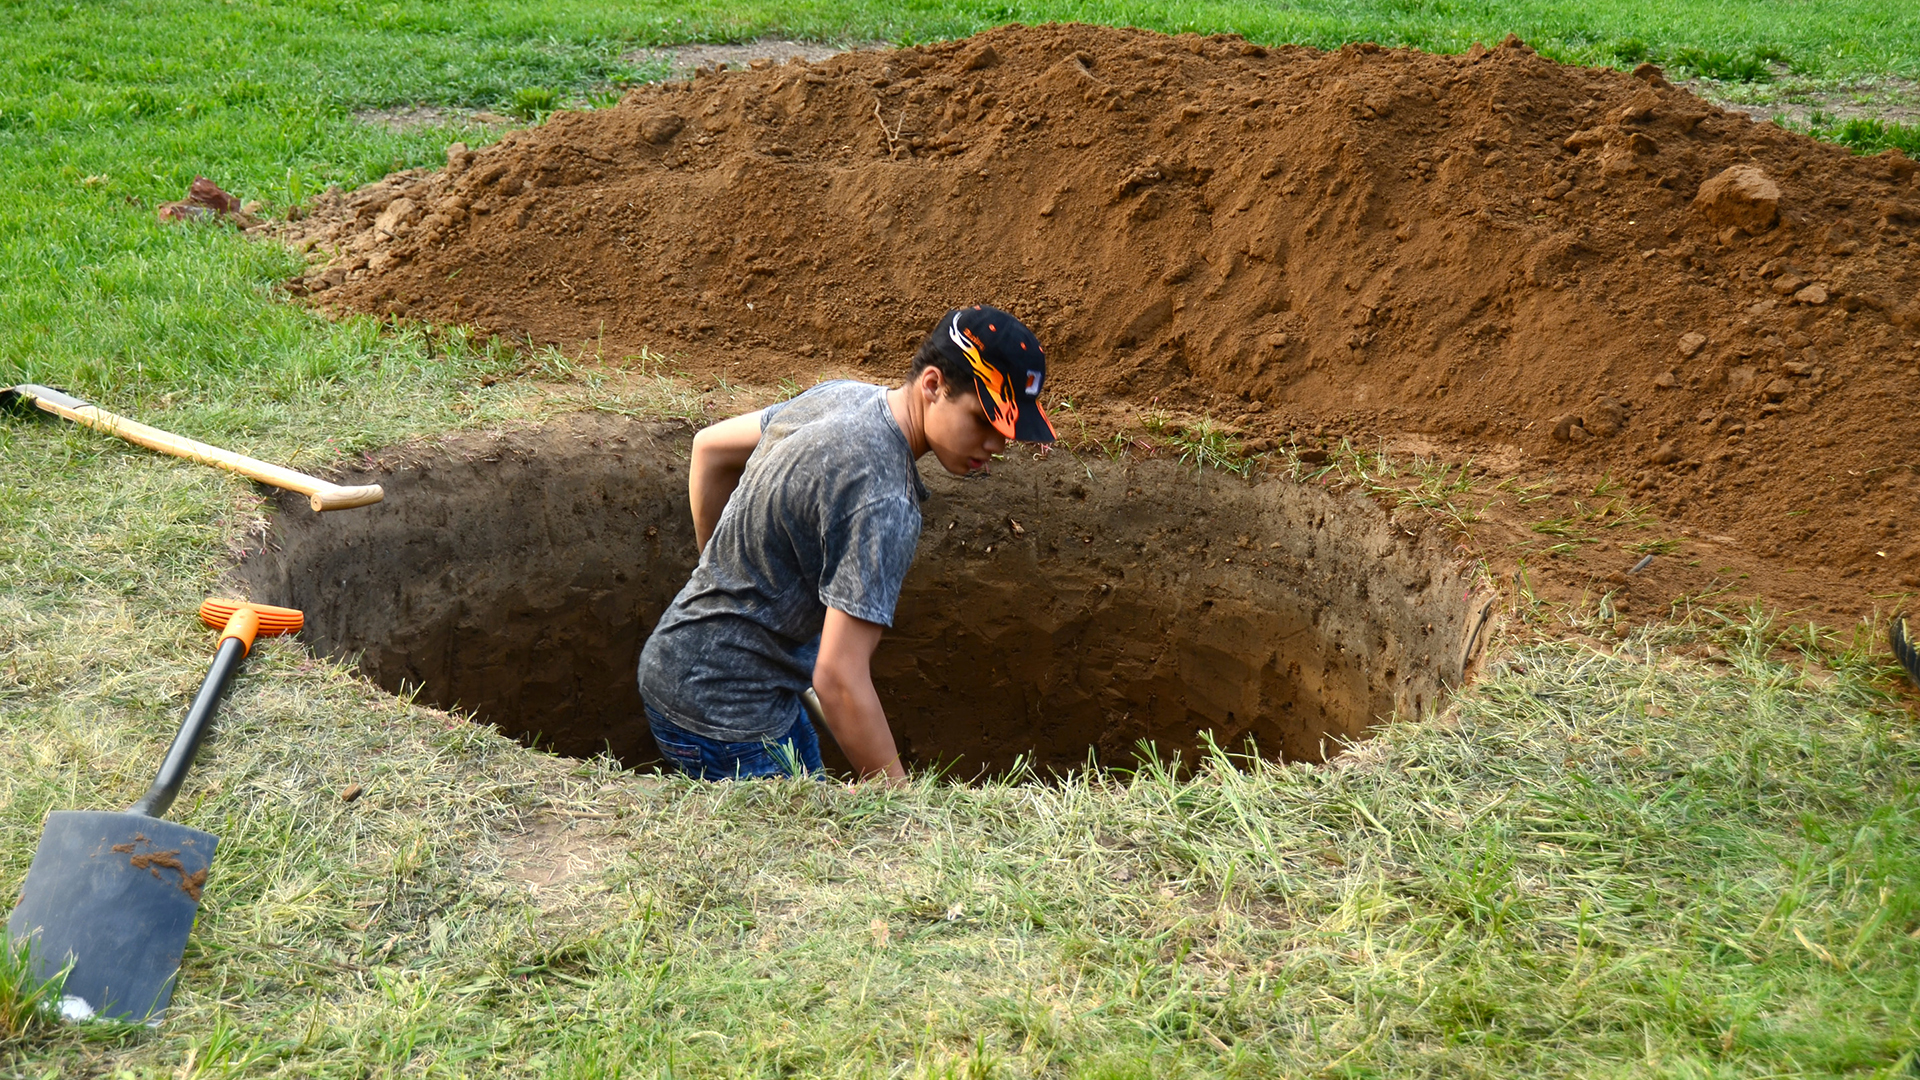 A colour photograph of a person digging a hole. The person is standing in a waist-deep hole, with mounds of dirt around them.